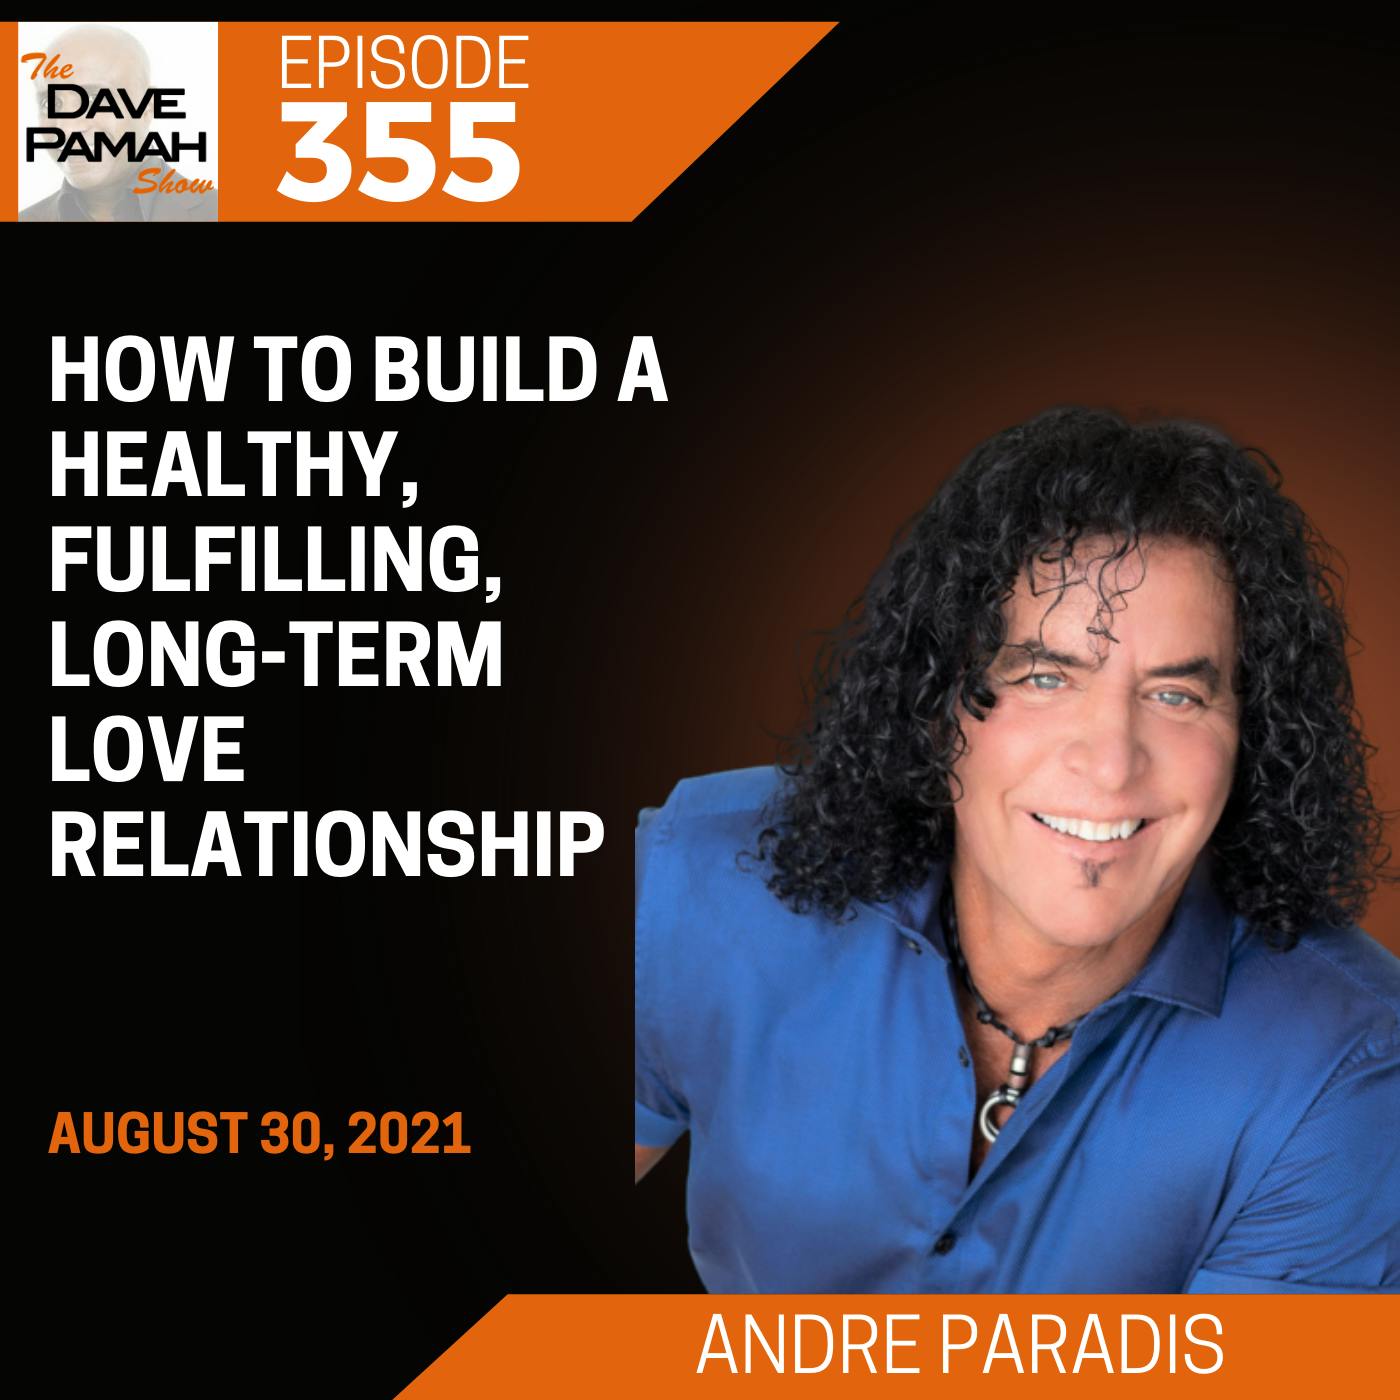 How to build a healthy, fulfilling, long-term love relationship with Andre Paradis